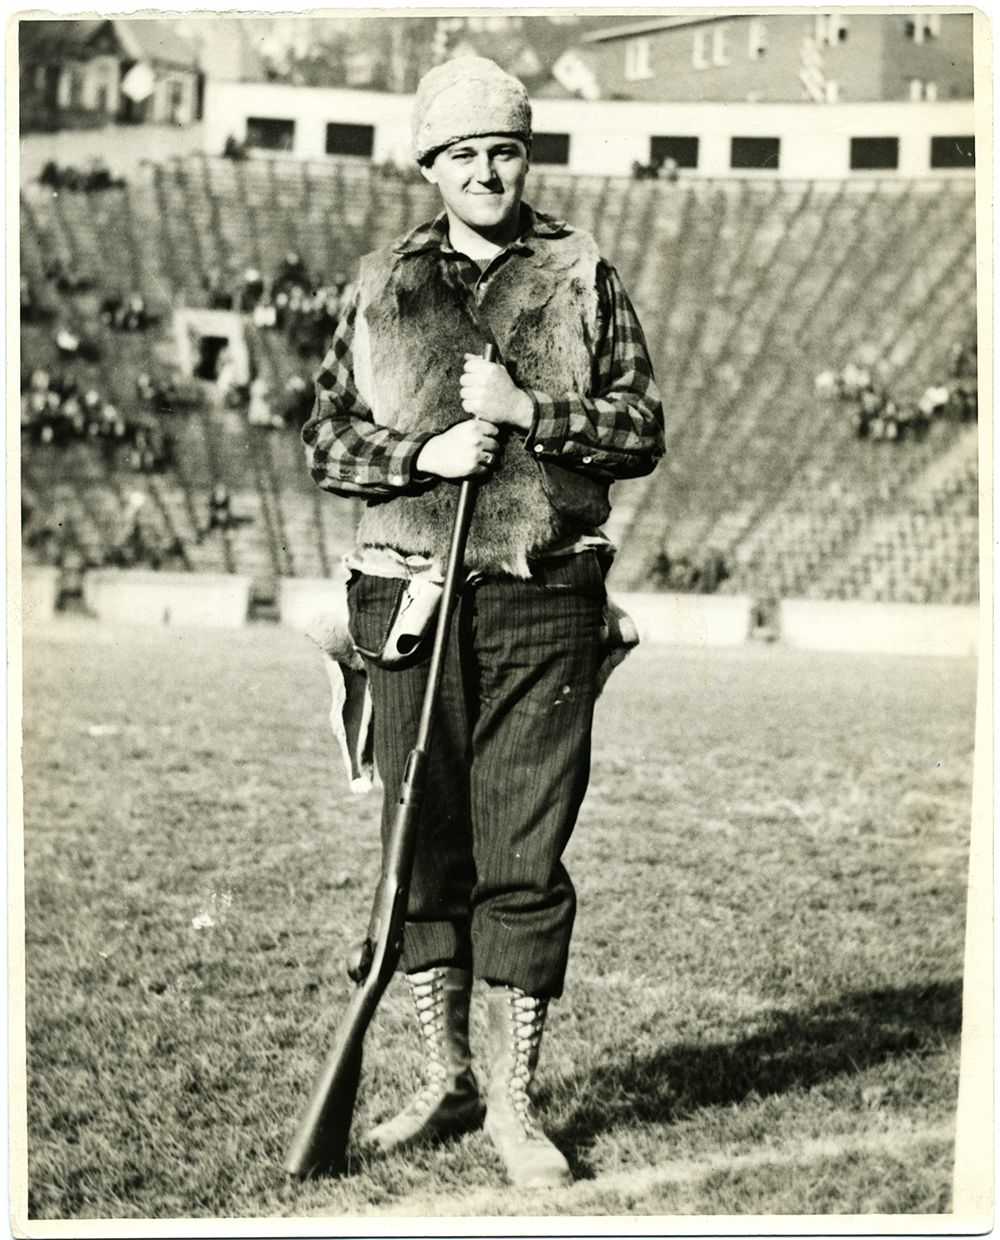 Photo of Bill Fahey, the Mountaineer in 1933, stands on Mountaineer Field with a rifle.